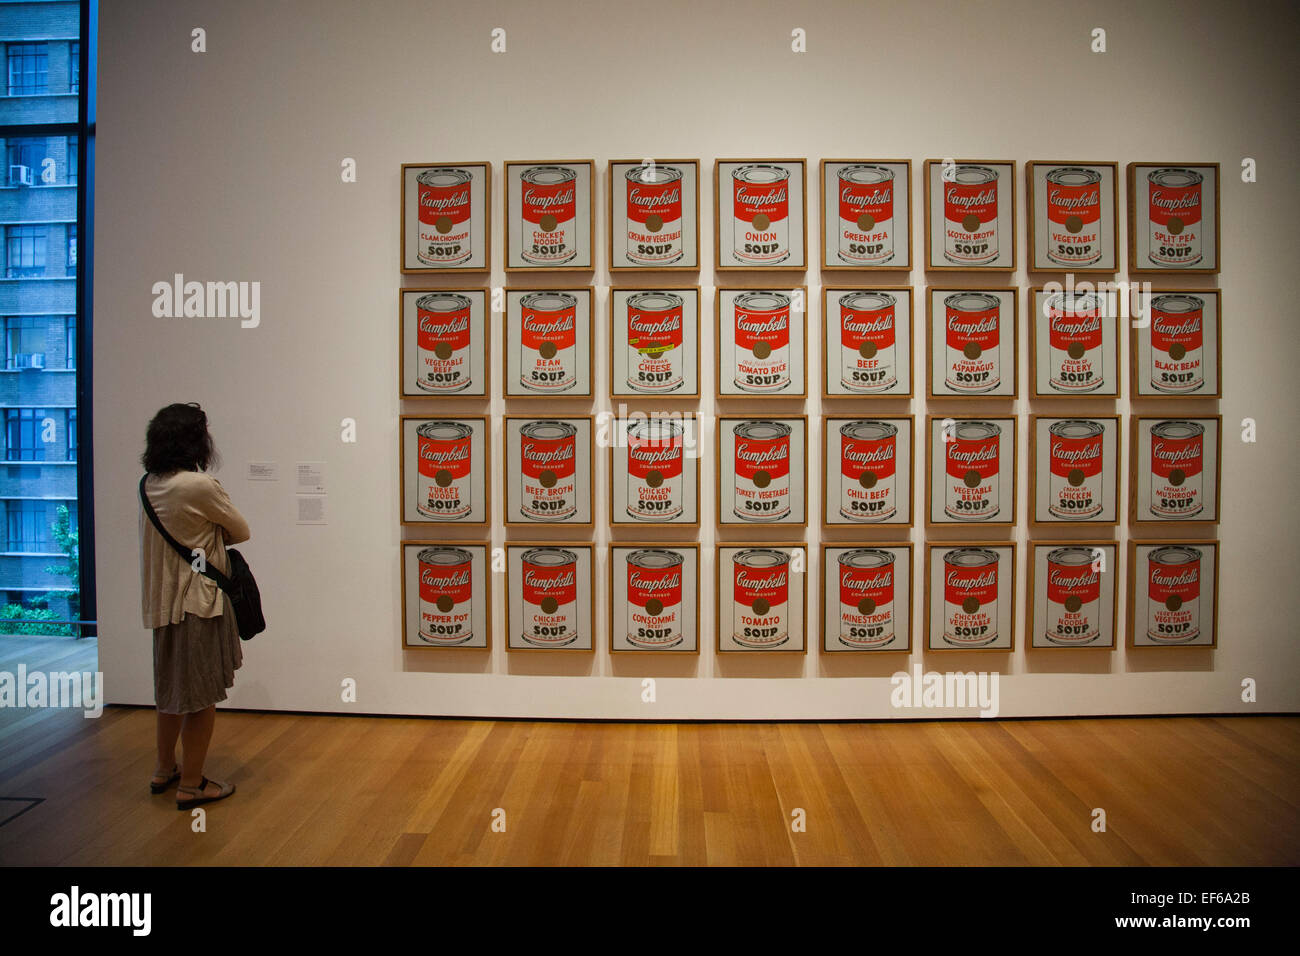 Campbell's soup cans, 1962, painting by Andy Warhol, MOMA, museum of modern art, New York, USA, America Stock Photo